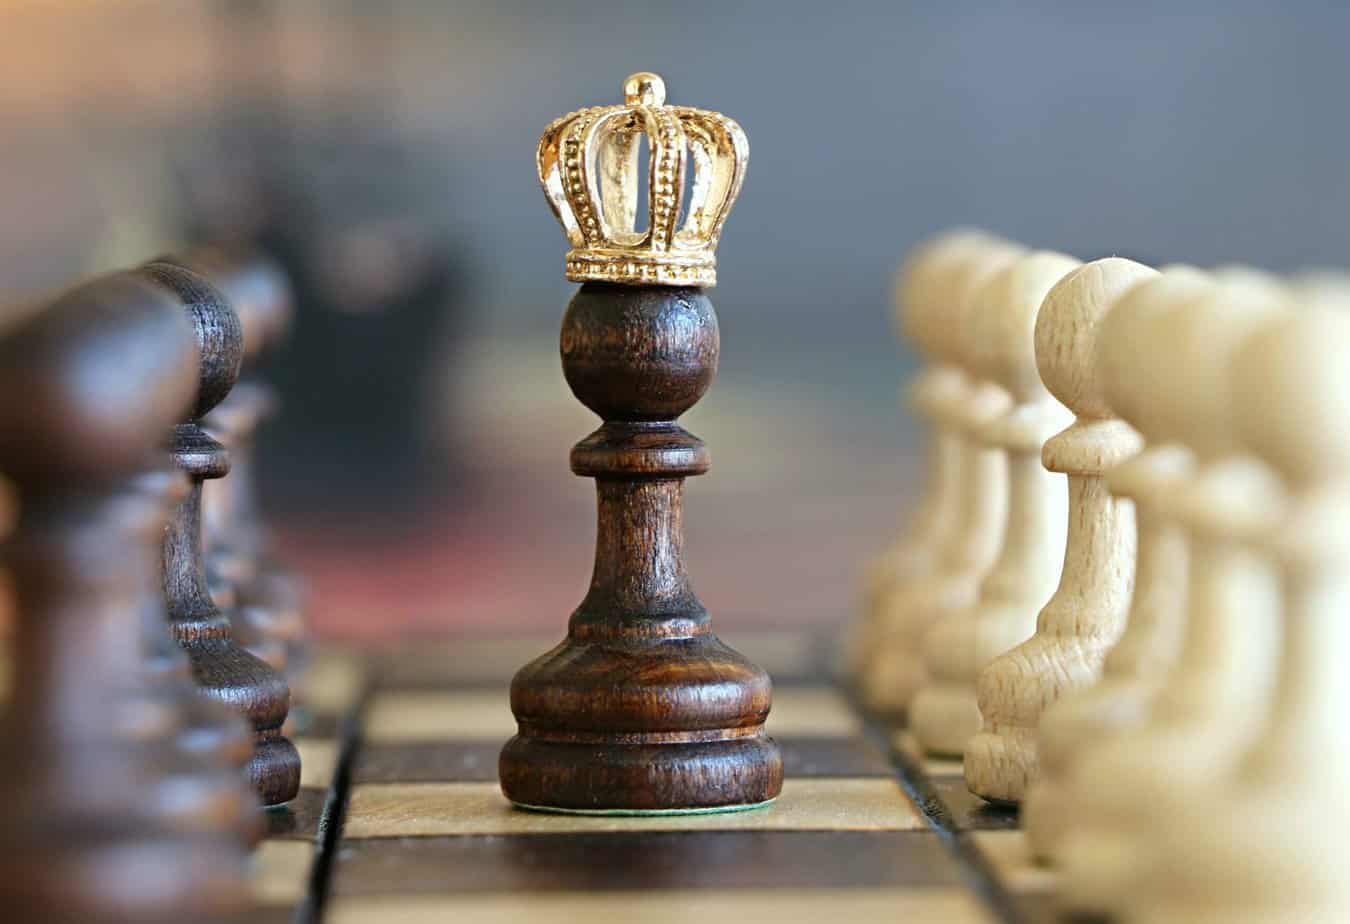 The Queen’s Gambit: How Accurately Does it Portray Addiction?